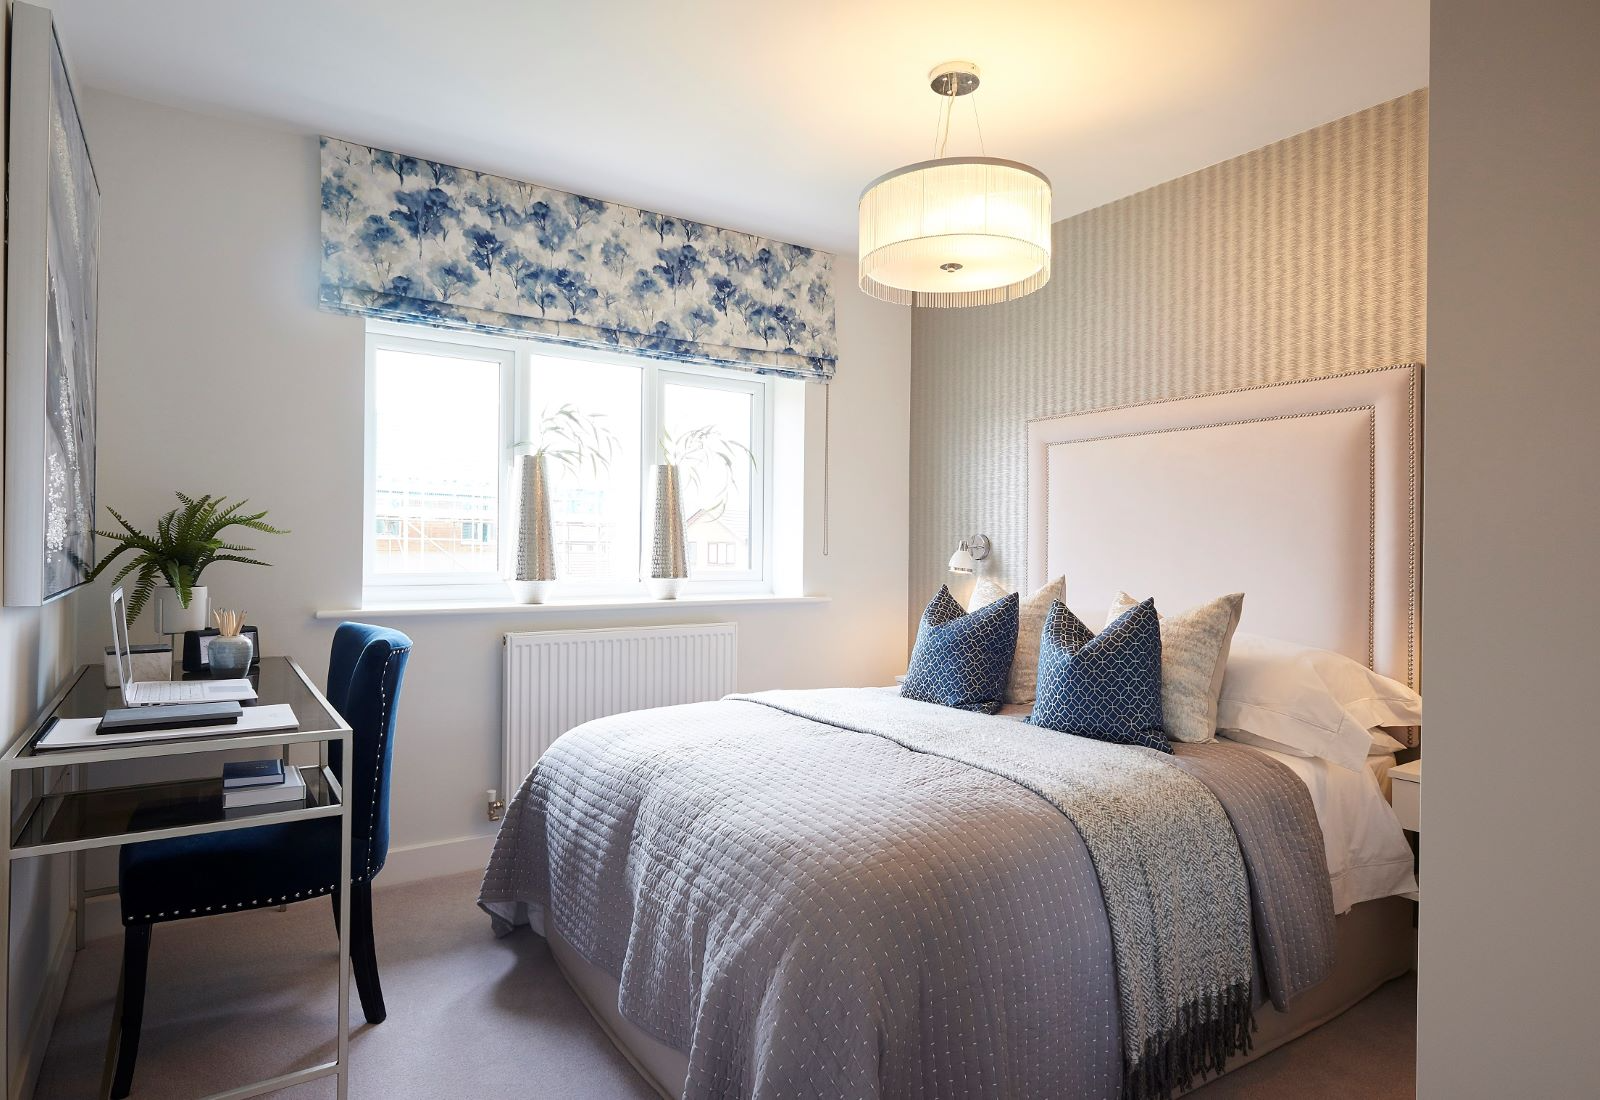 A Baycliffe Show Home